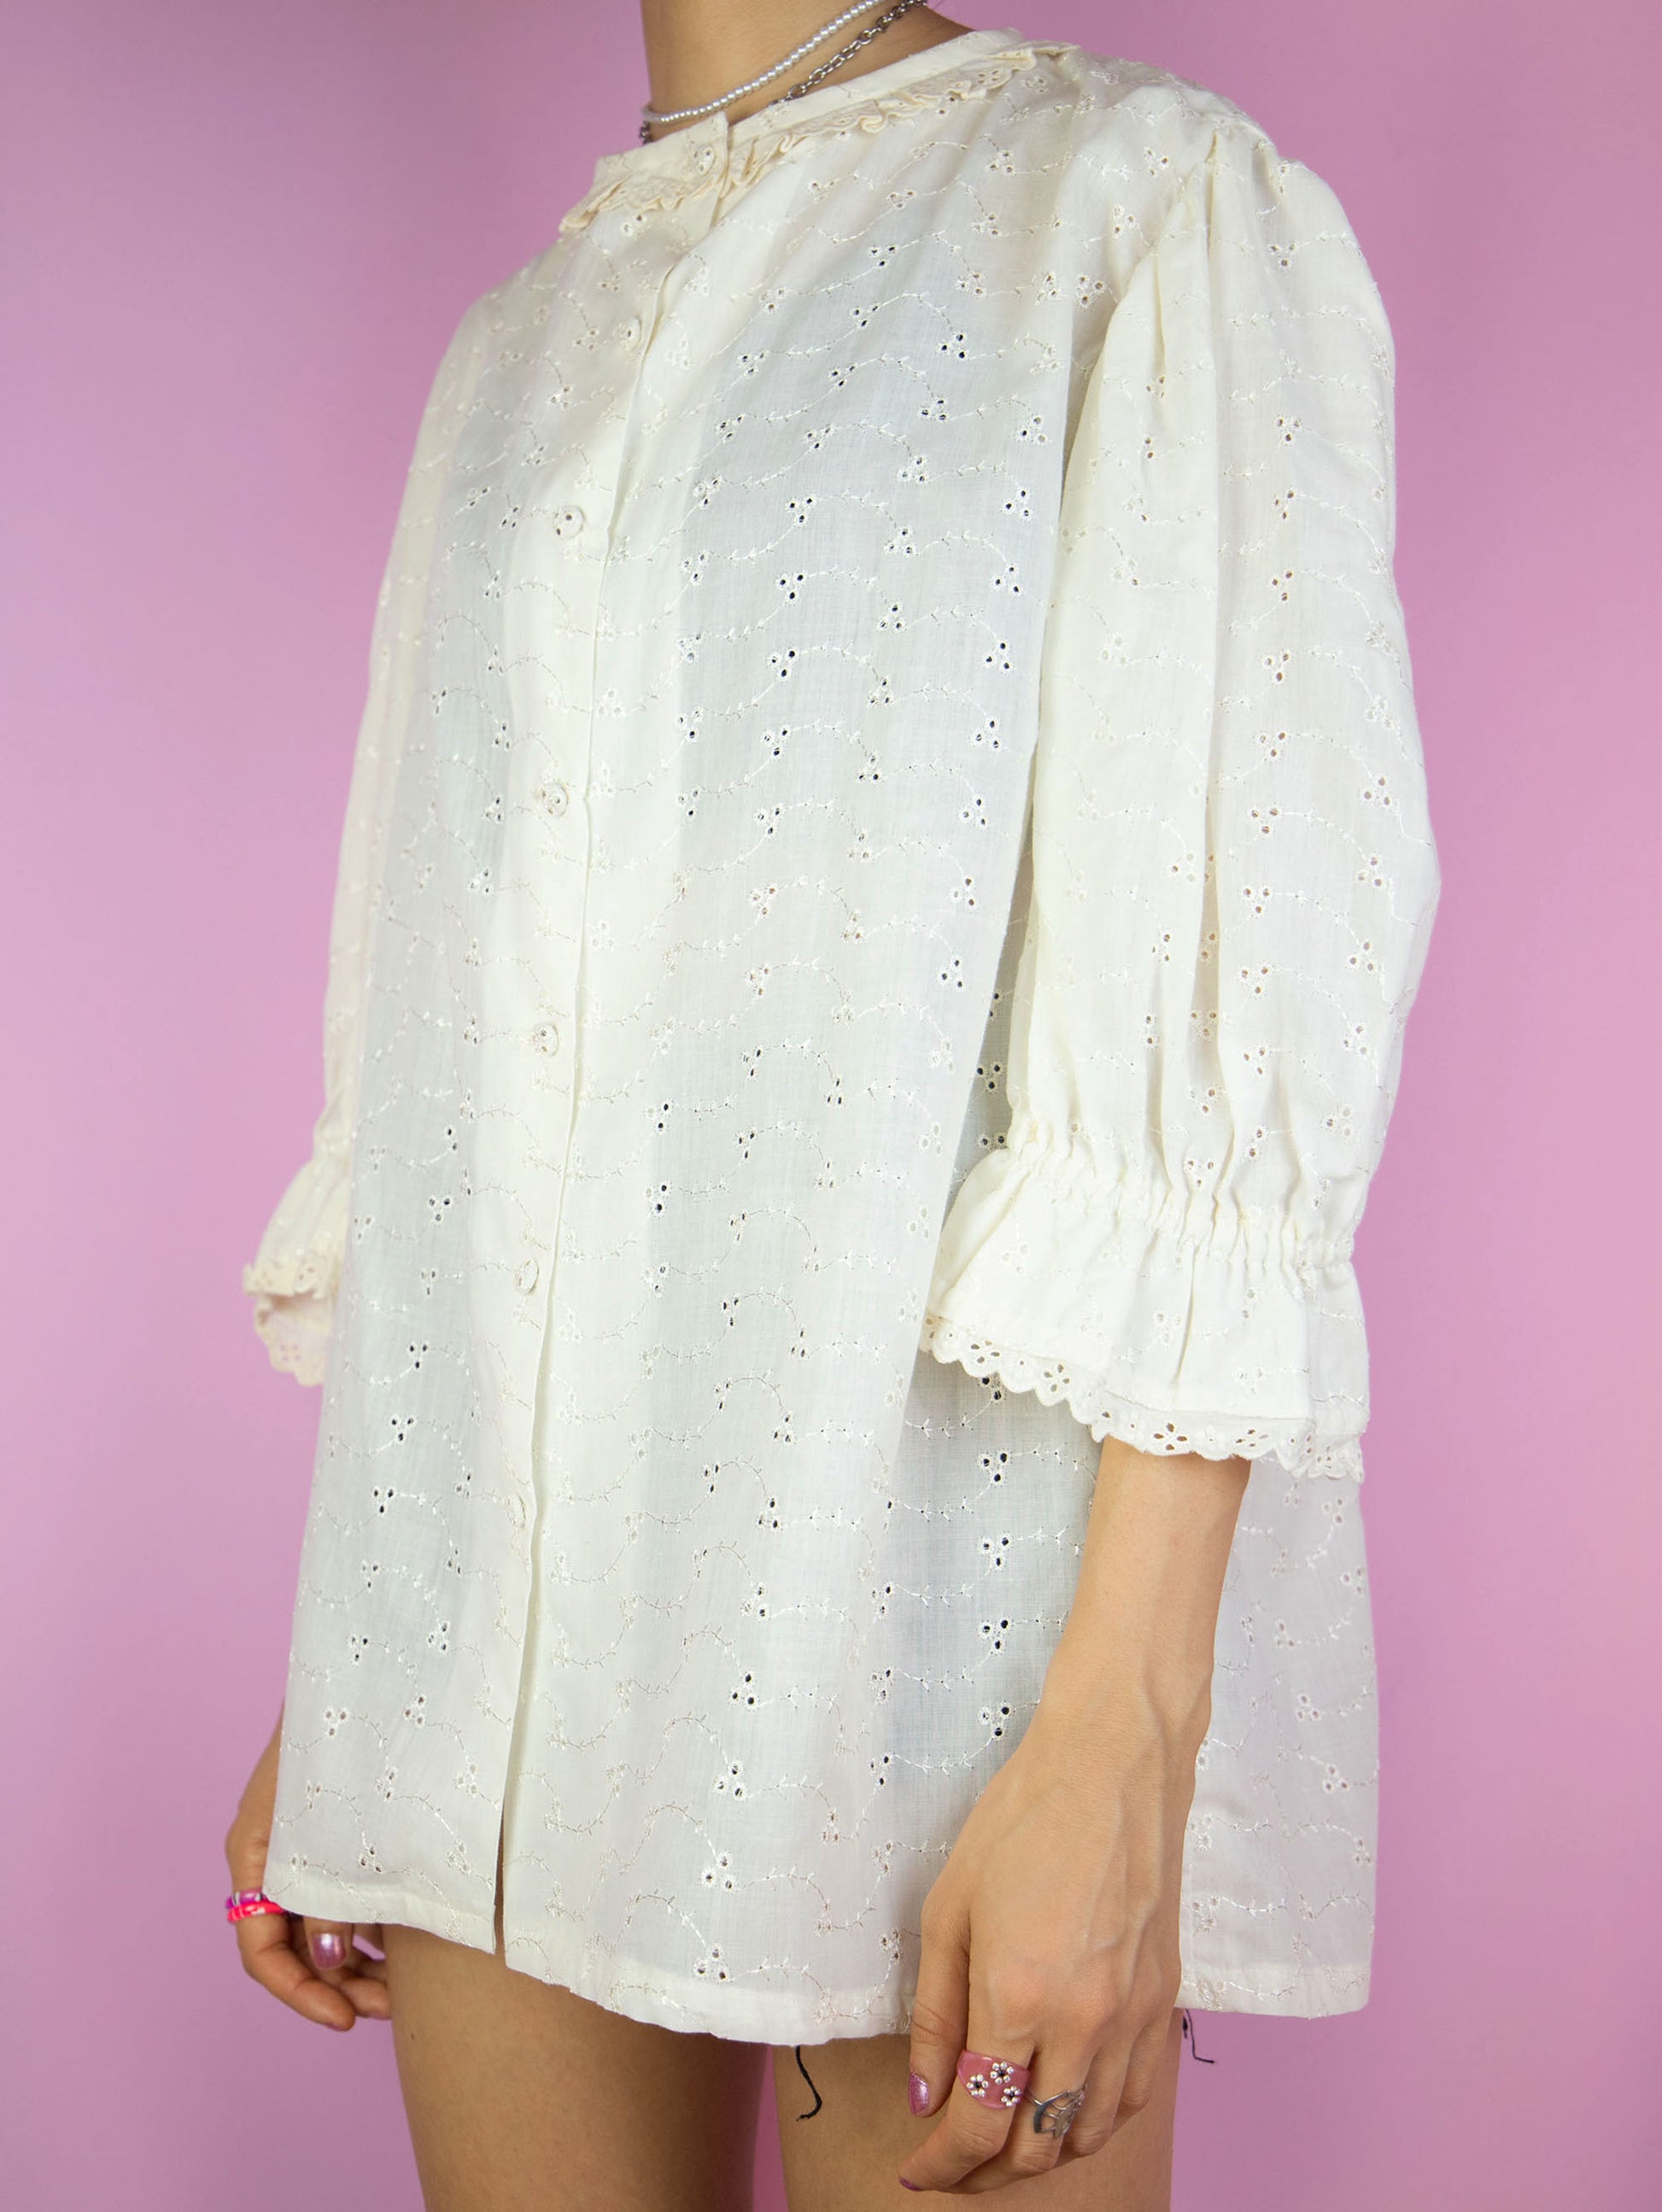 The Vintage 90s Cream White Blouse is a country cottage prairie inspired summer shirt with a ruffled neckline, lace trim and floral embroidery, buttons and puff sleeves.